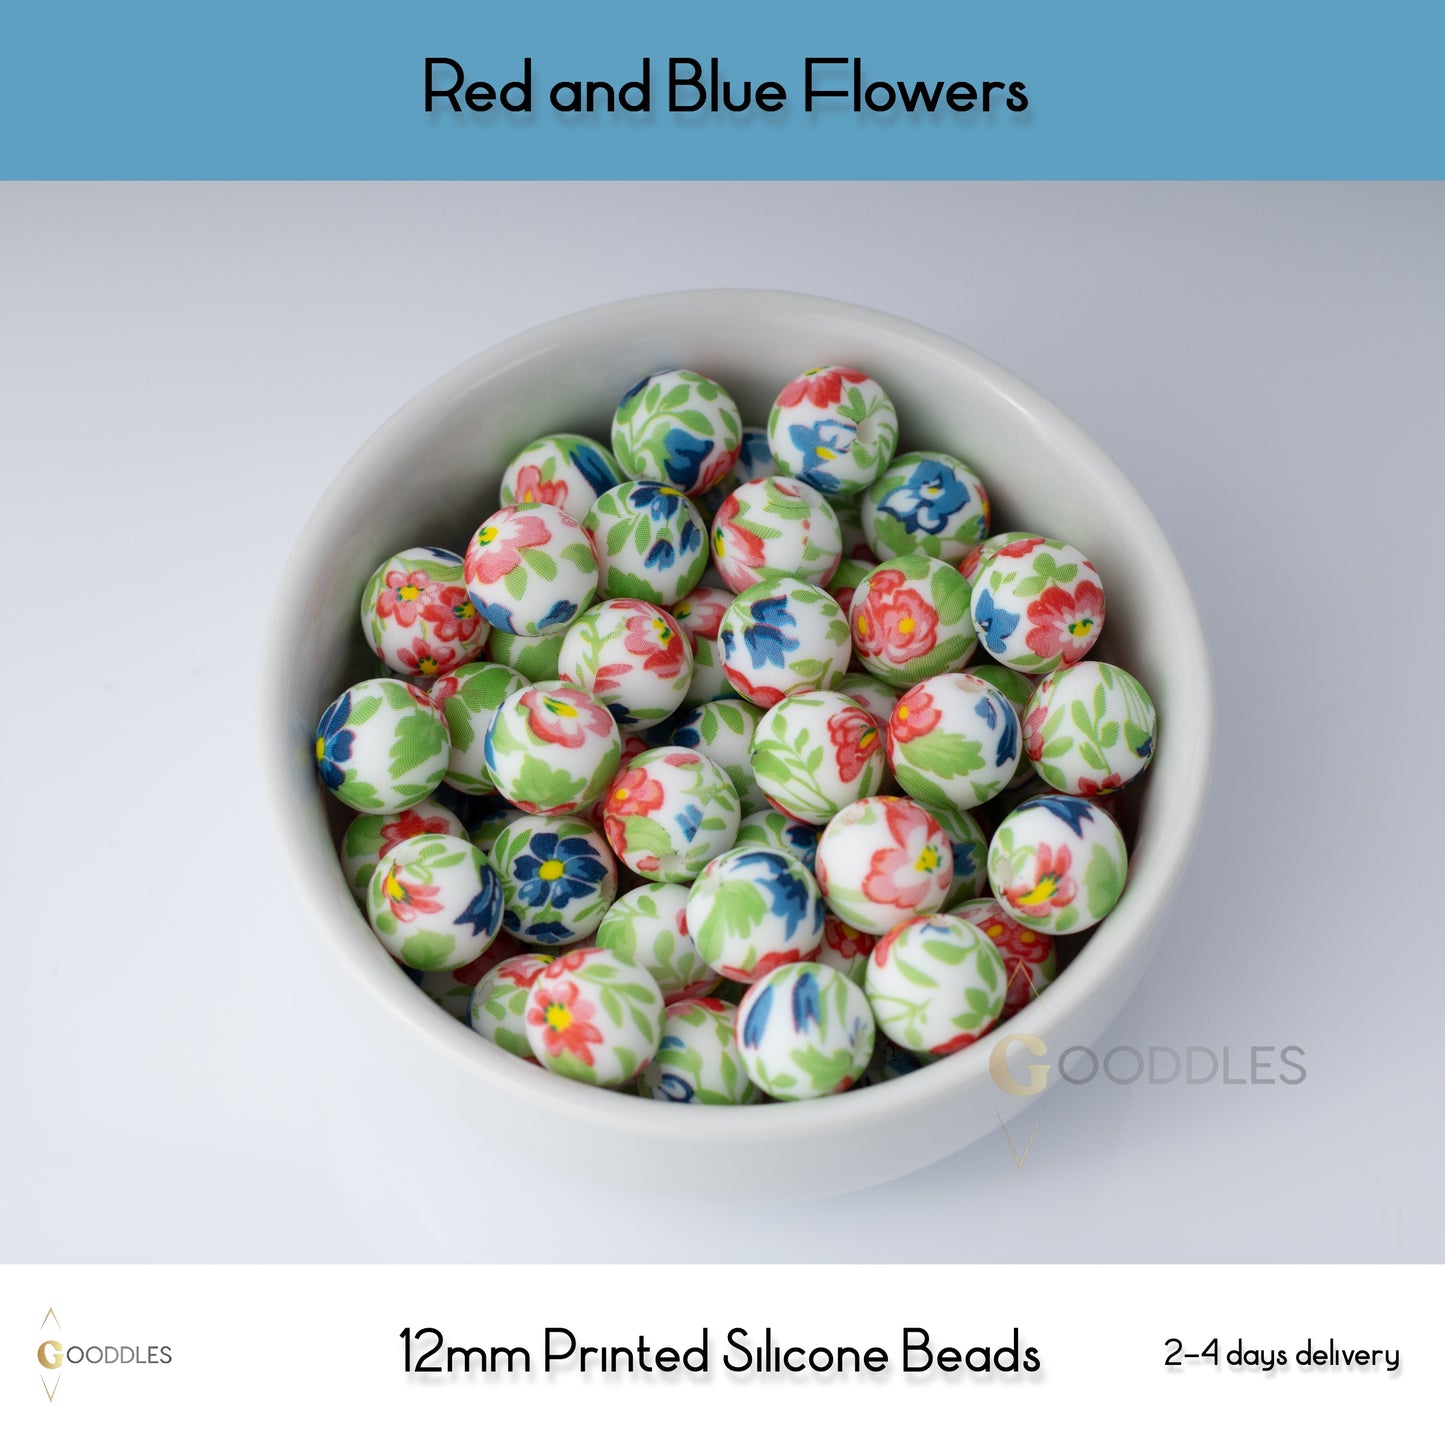 5pcs, Red and Blue Flowers Silicone Beads Printed Round Silicone Beads